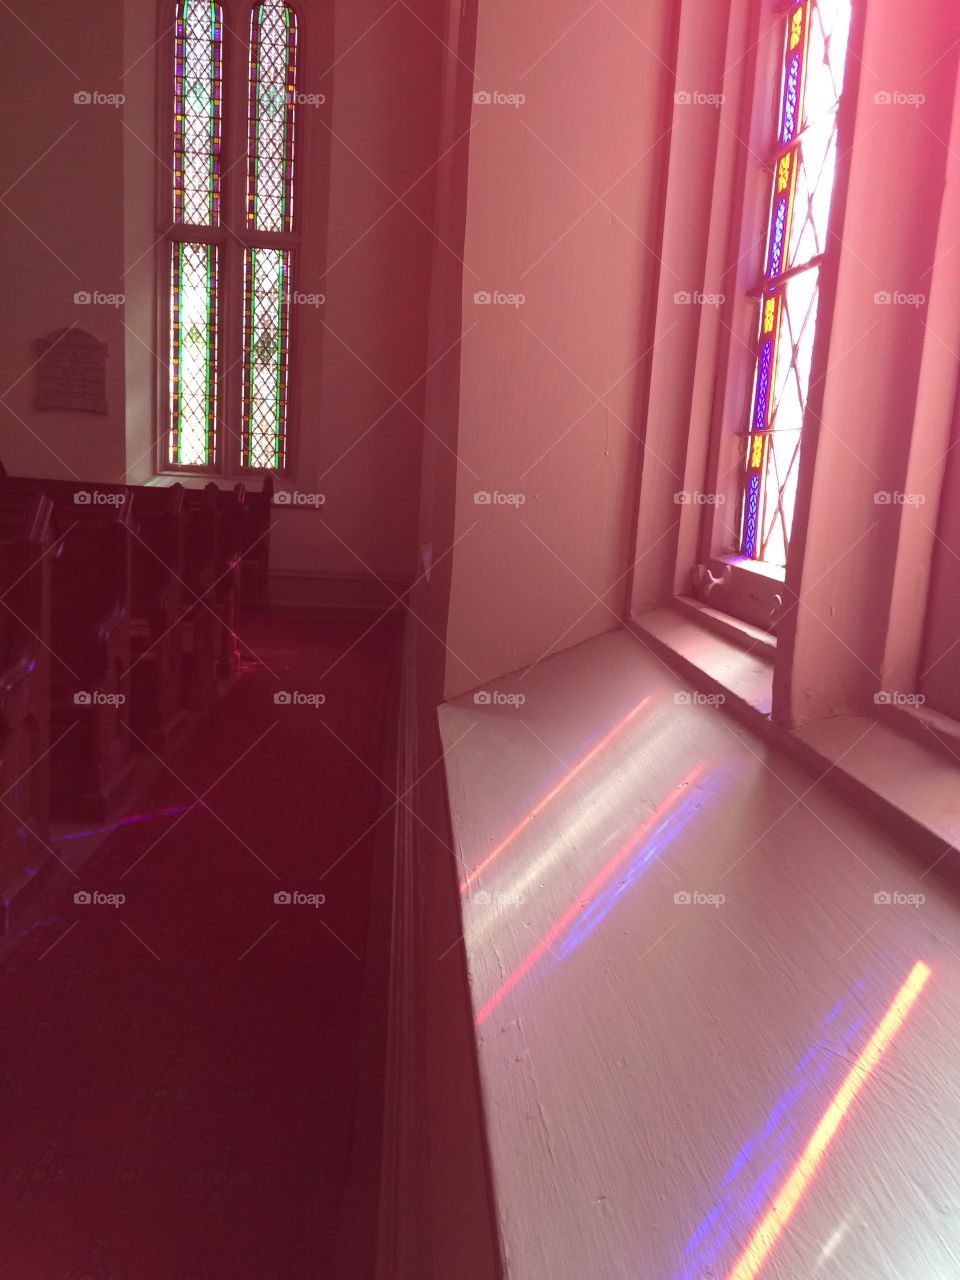 The beautiful stained glass window panes of an old church, the colorful light streaming in, covering the dusty carpets and antique pews with its warm glow. 